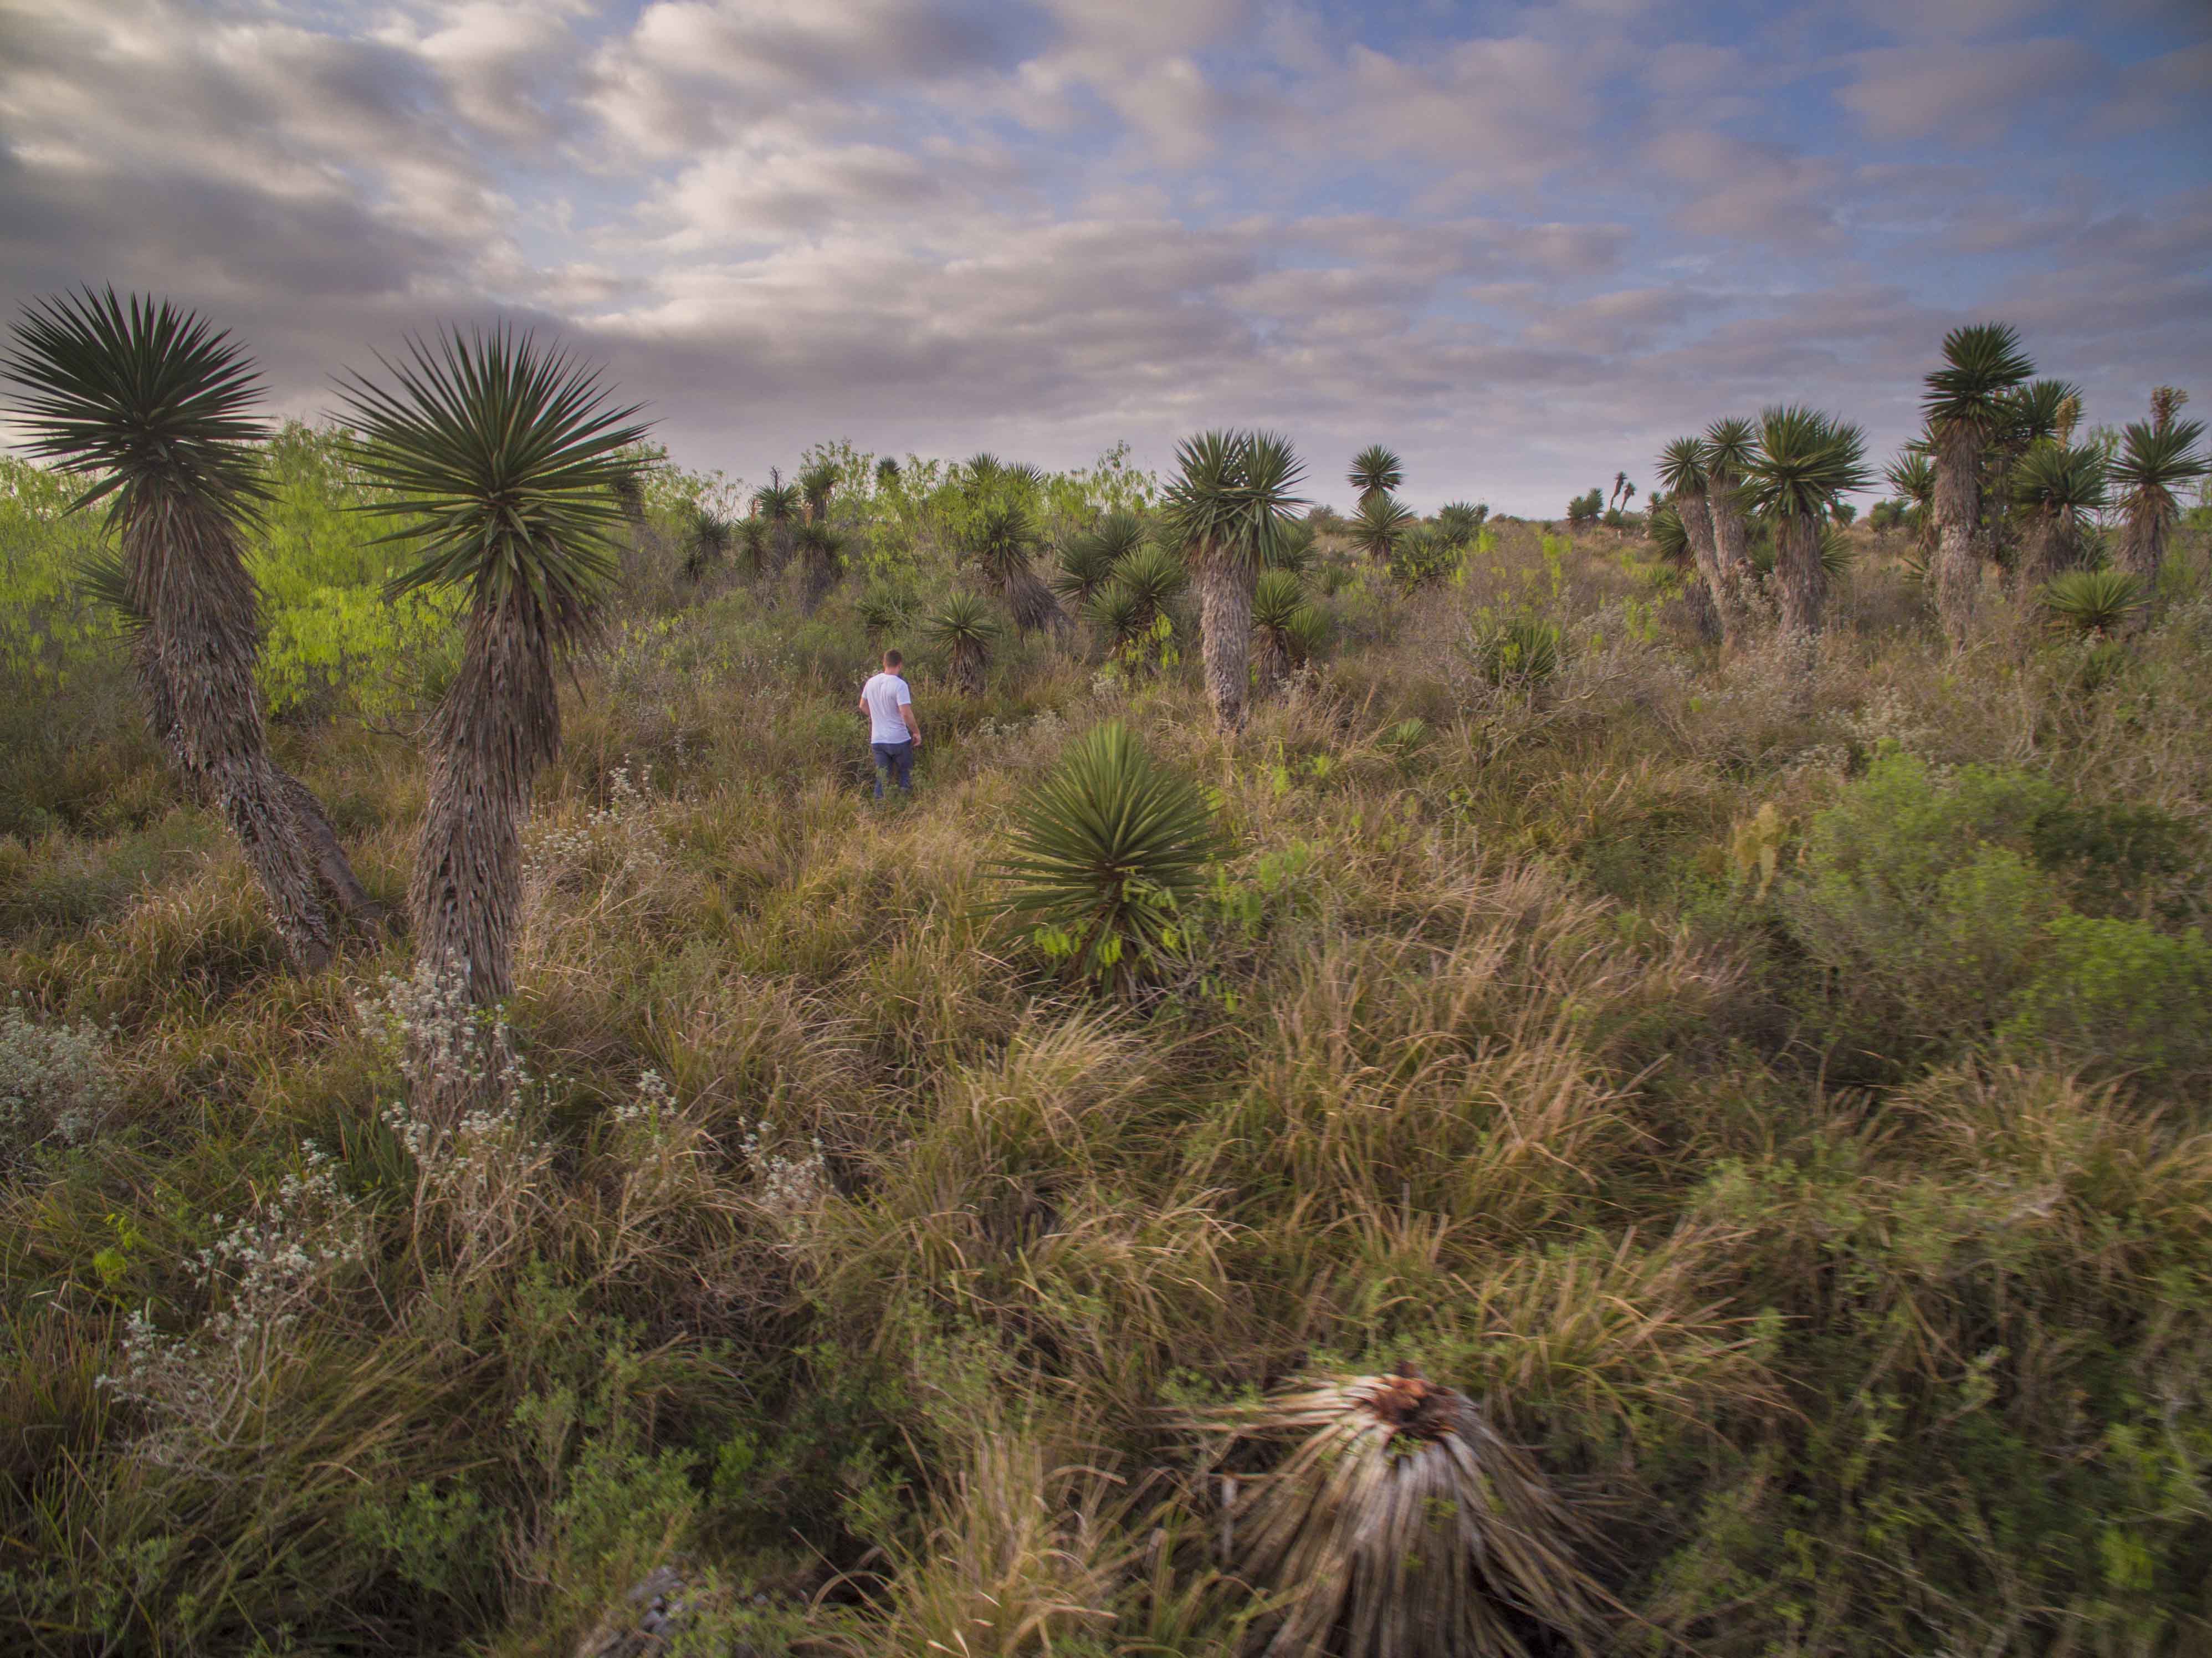 A man walks through shrubland filled with palm trees.